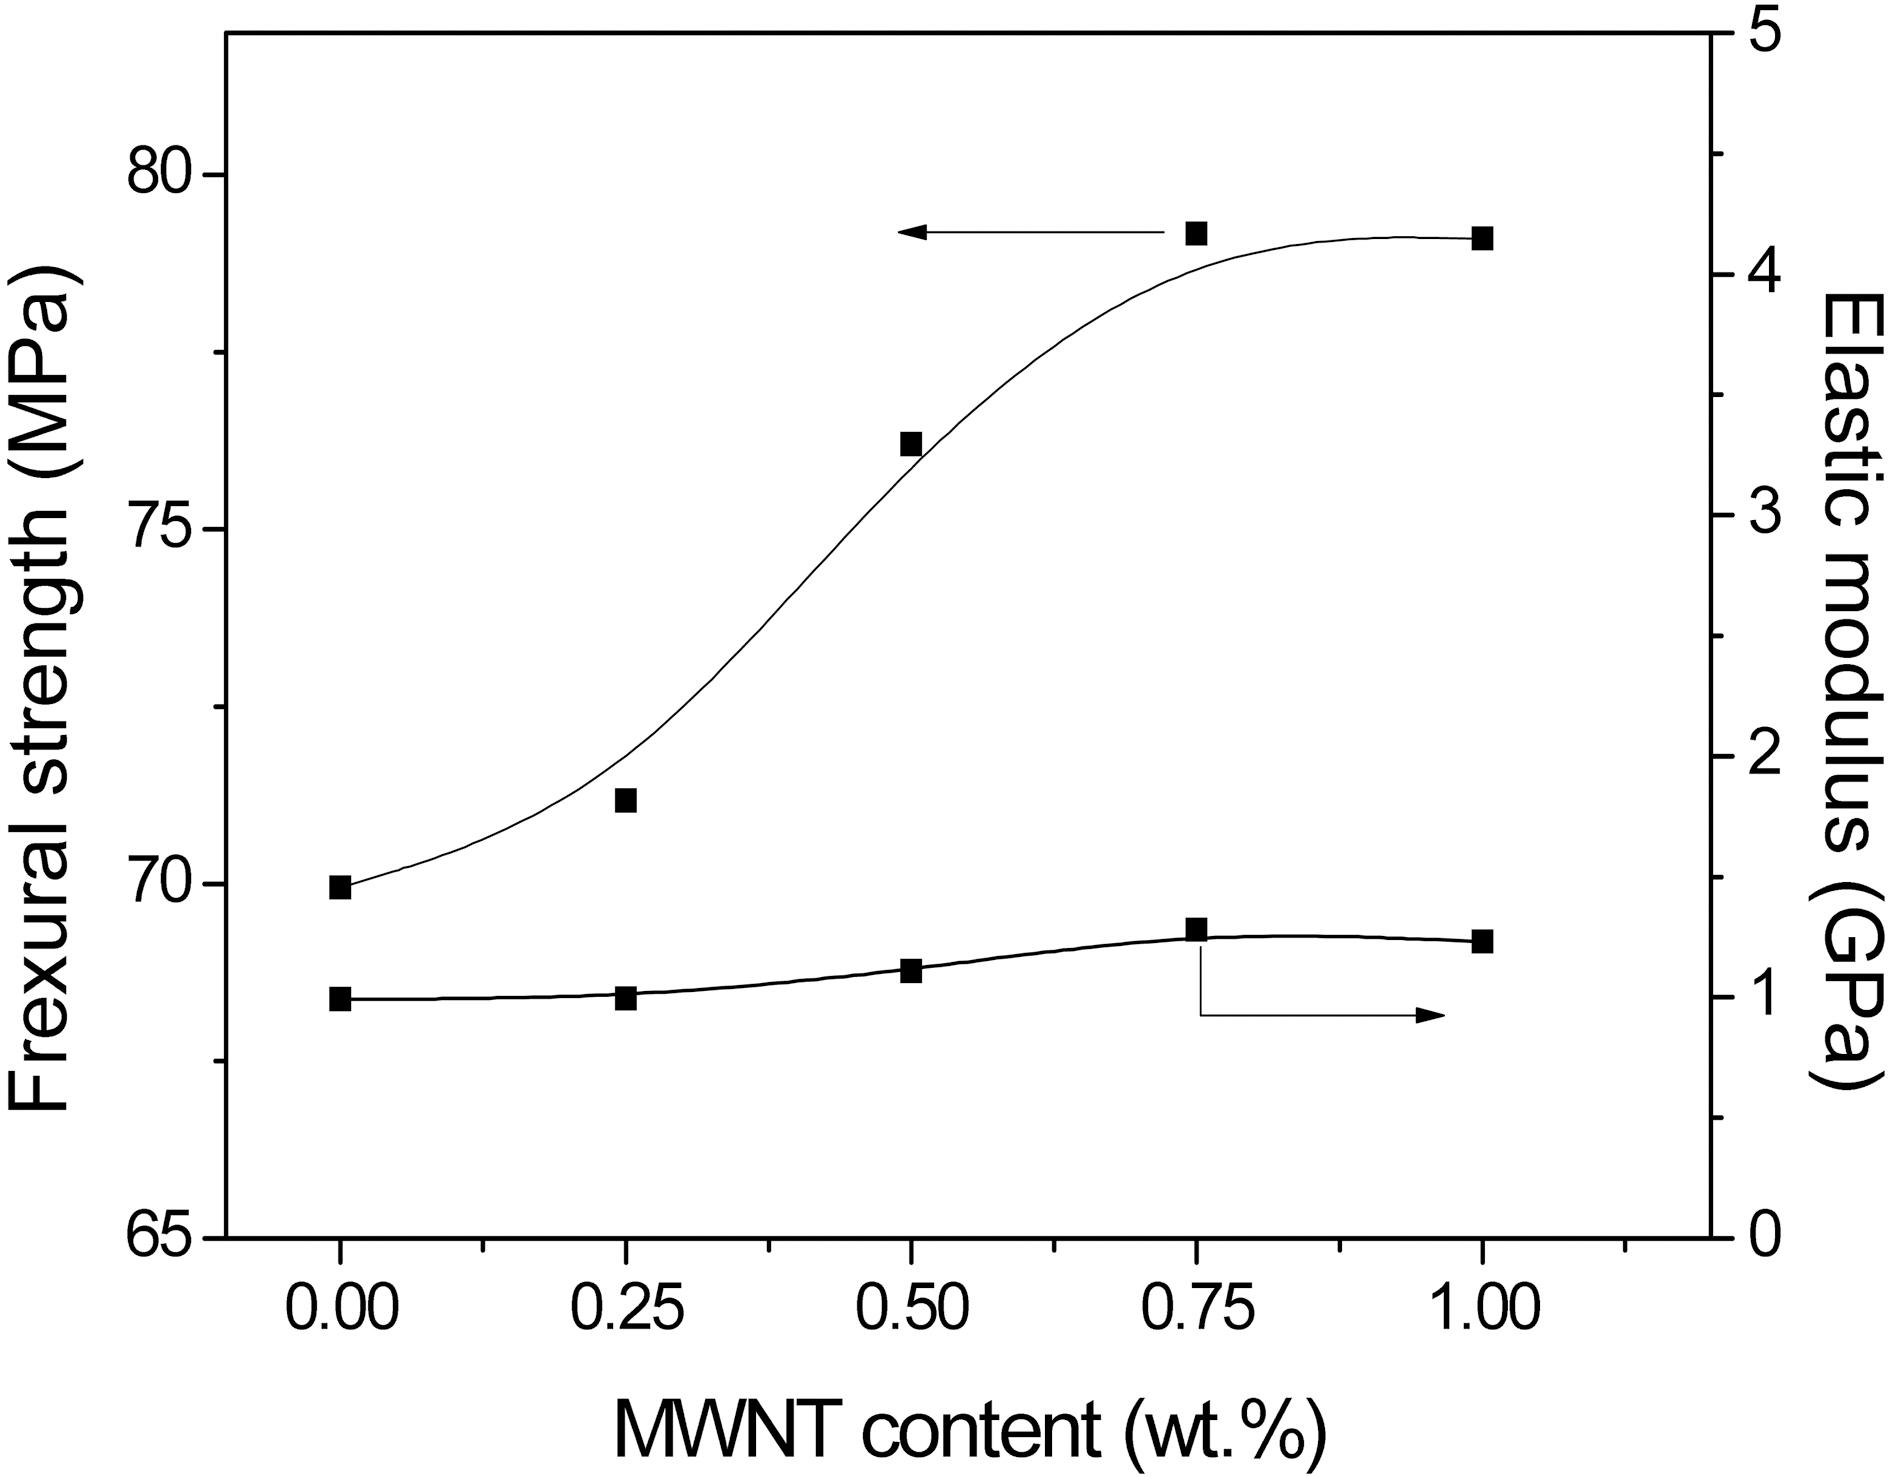 Flexural strength and elastic modulus of the epoxy nanocomposites as a function of the MWNT content (2 wt.% GNs was fixed).